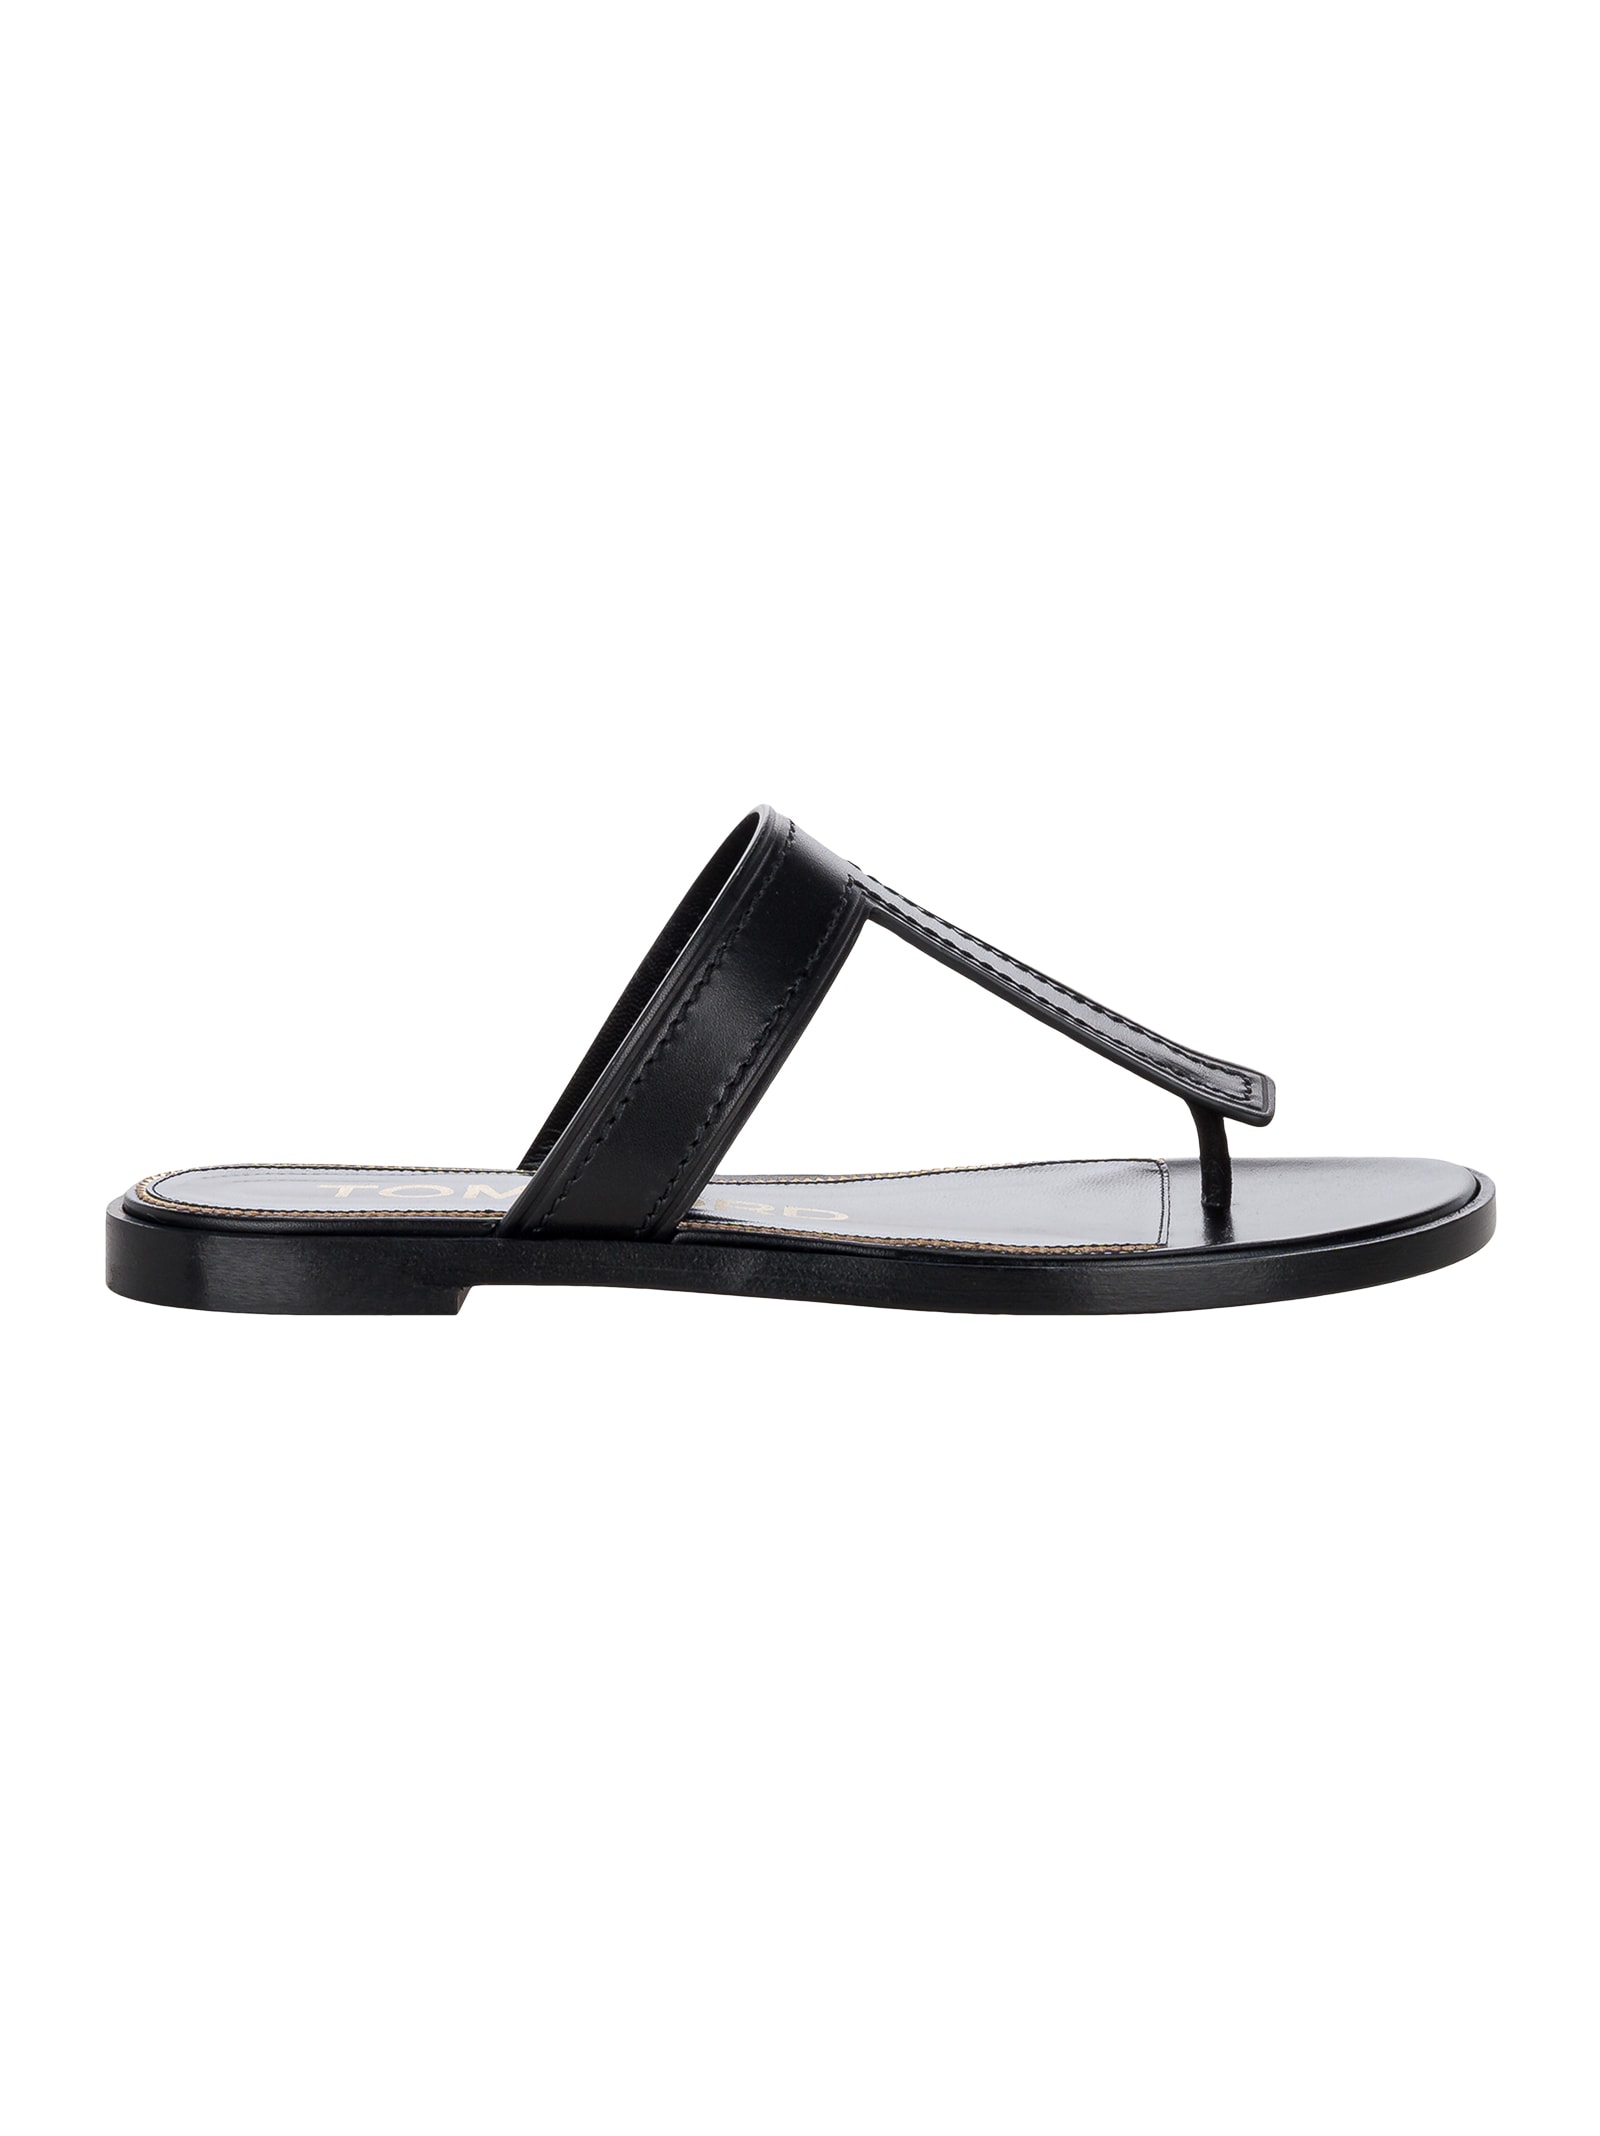 Tom Ford Leather Thong Sandals